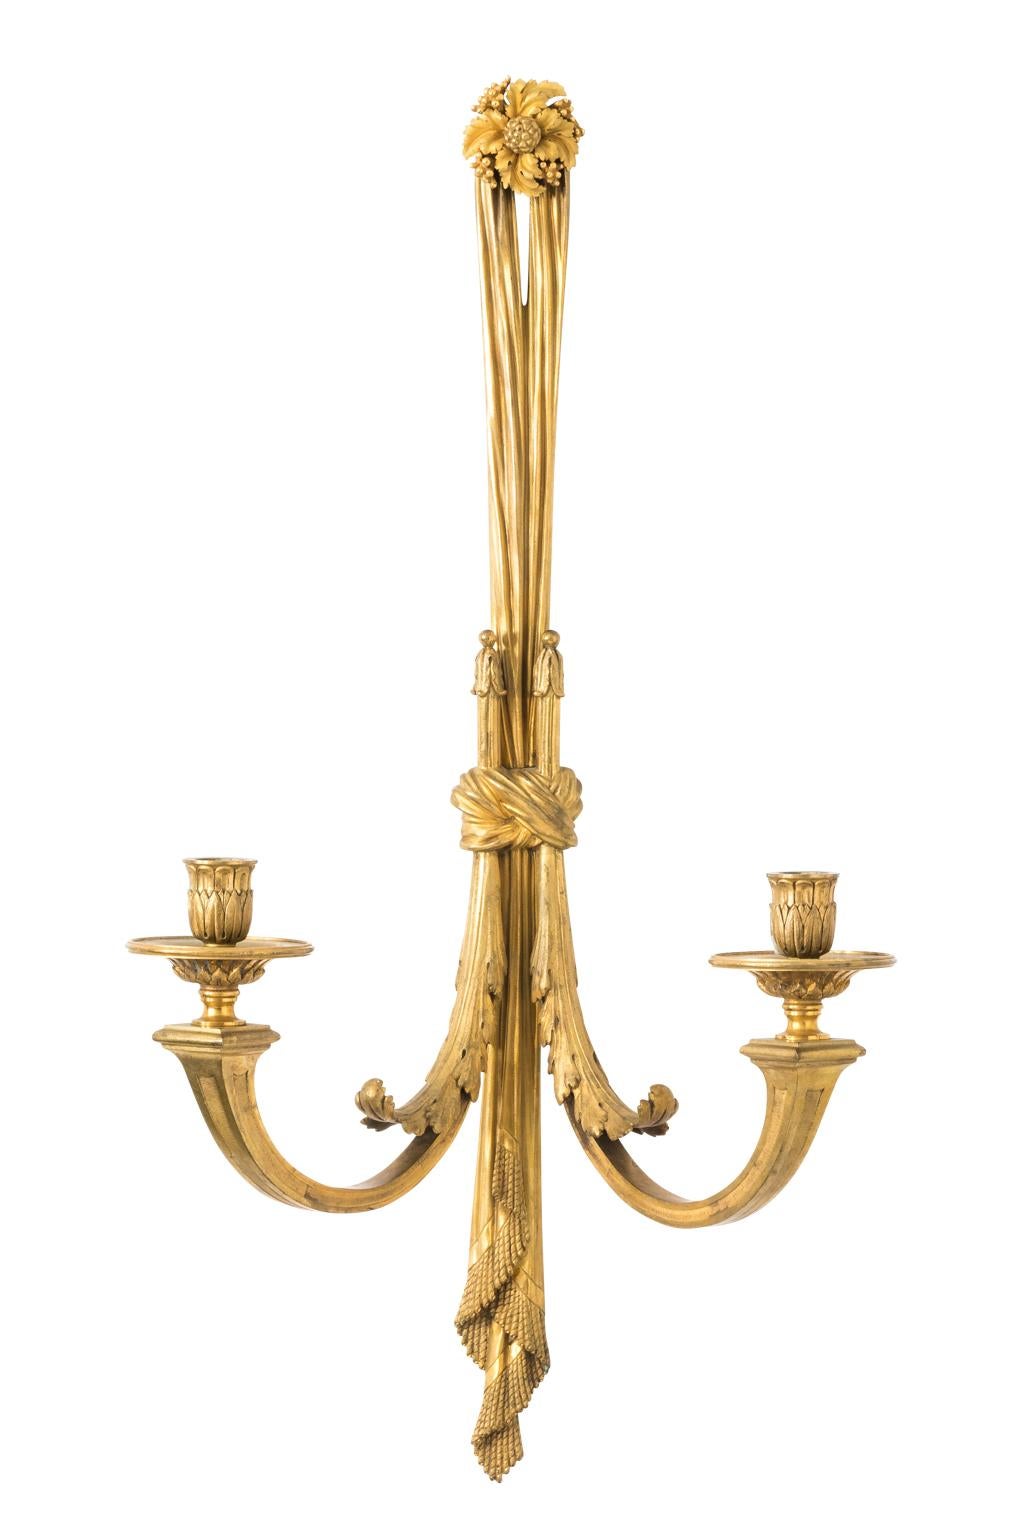 Pair of Louis XV Gilt Bronze Wall Candelabra For Sale 1